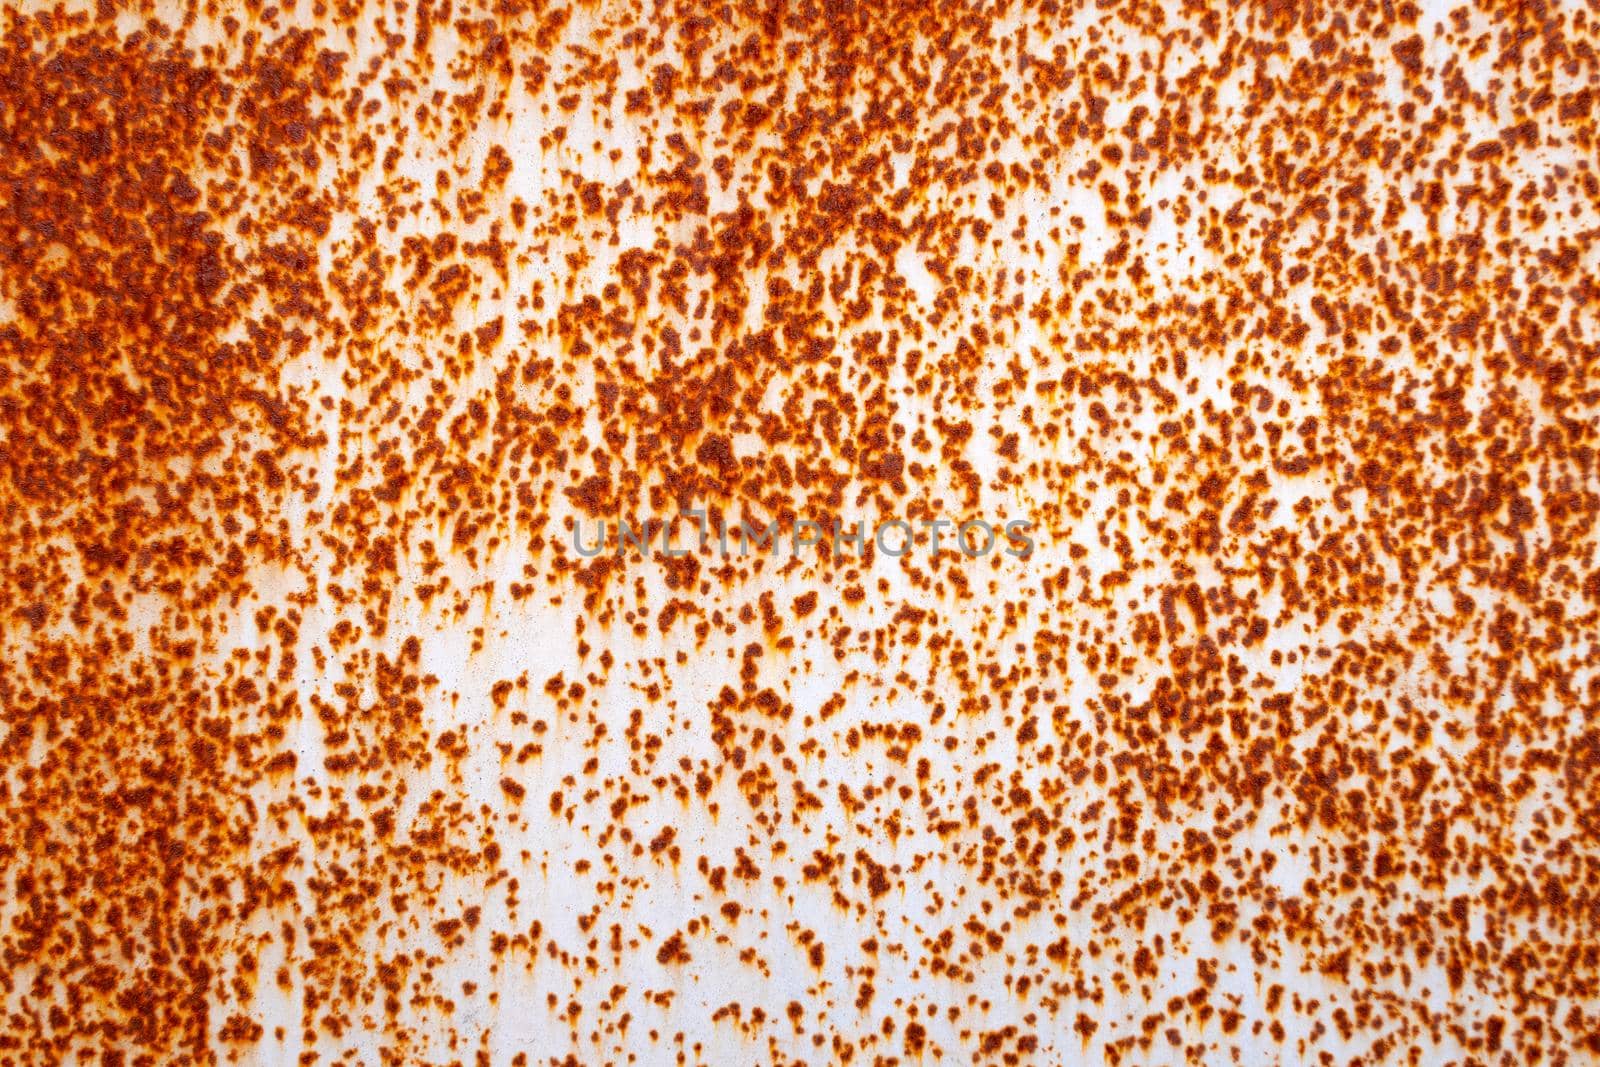 Rusty iron and the remnants of gray paint.Horizontal background.